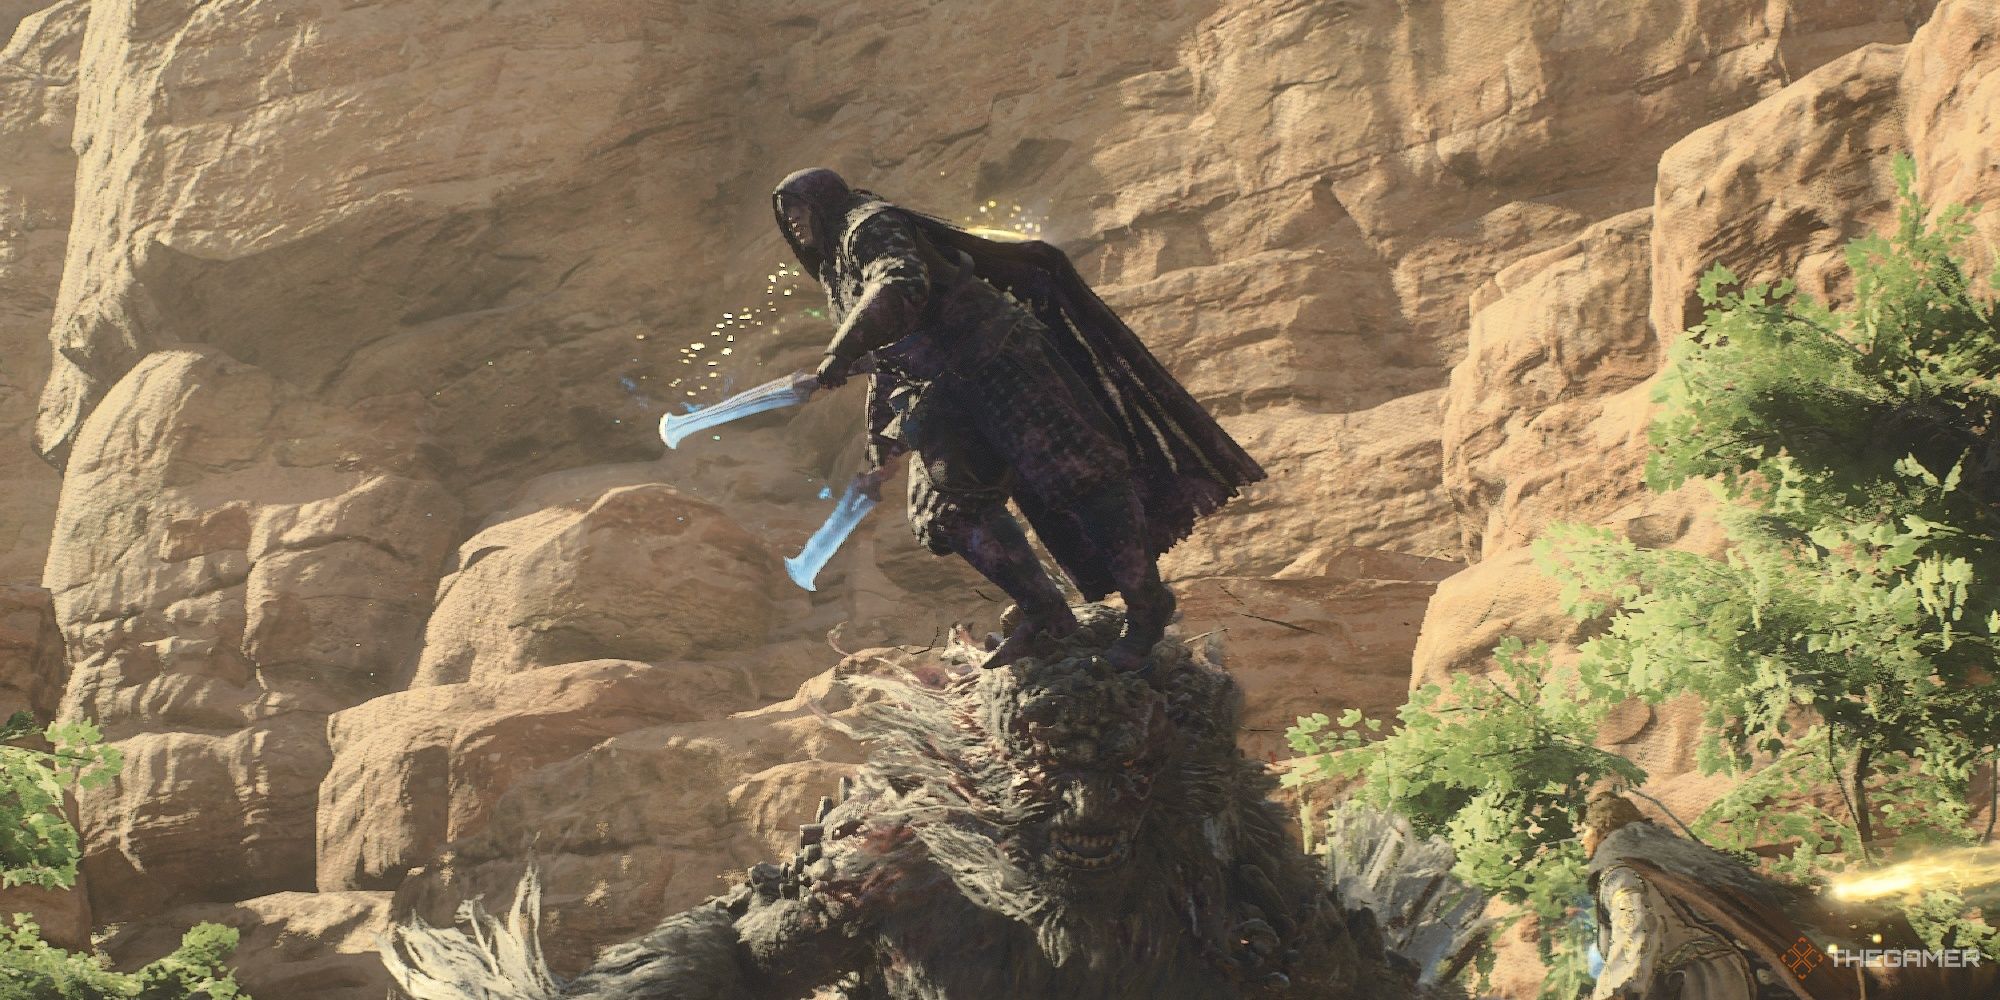 A Thief stands on an ogre's head in Dragon's Dogma 2.